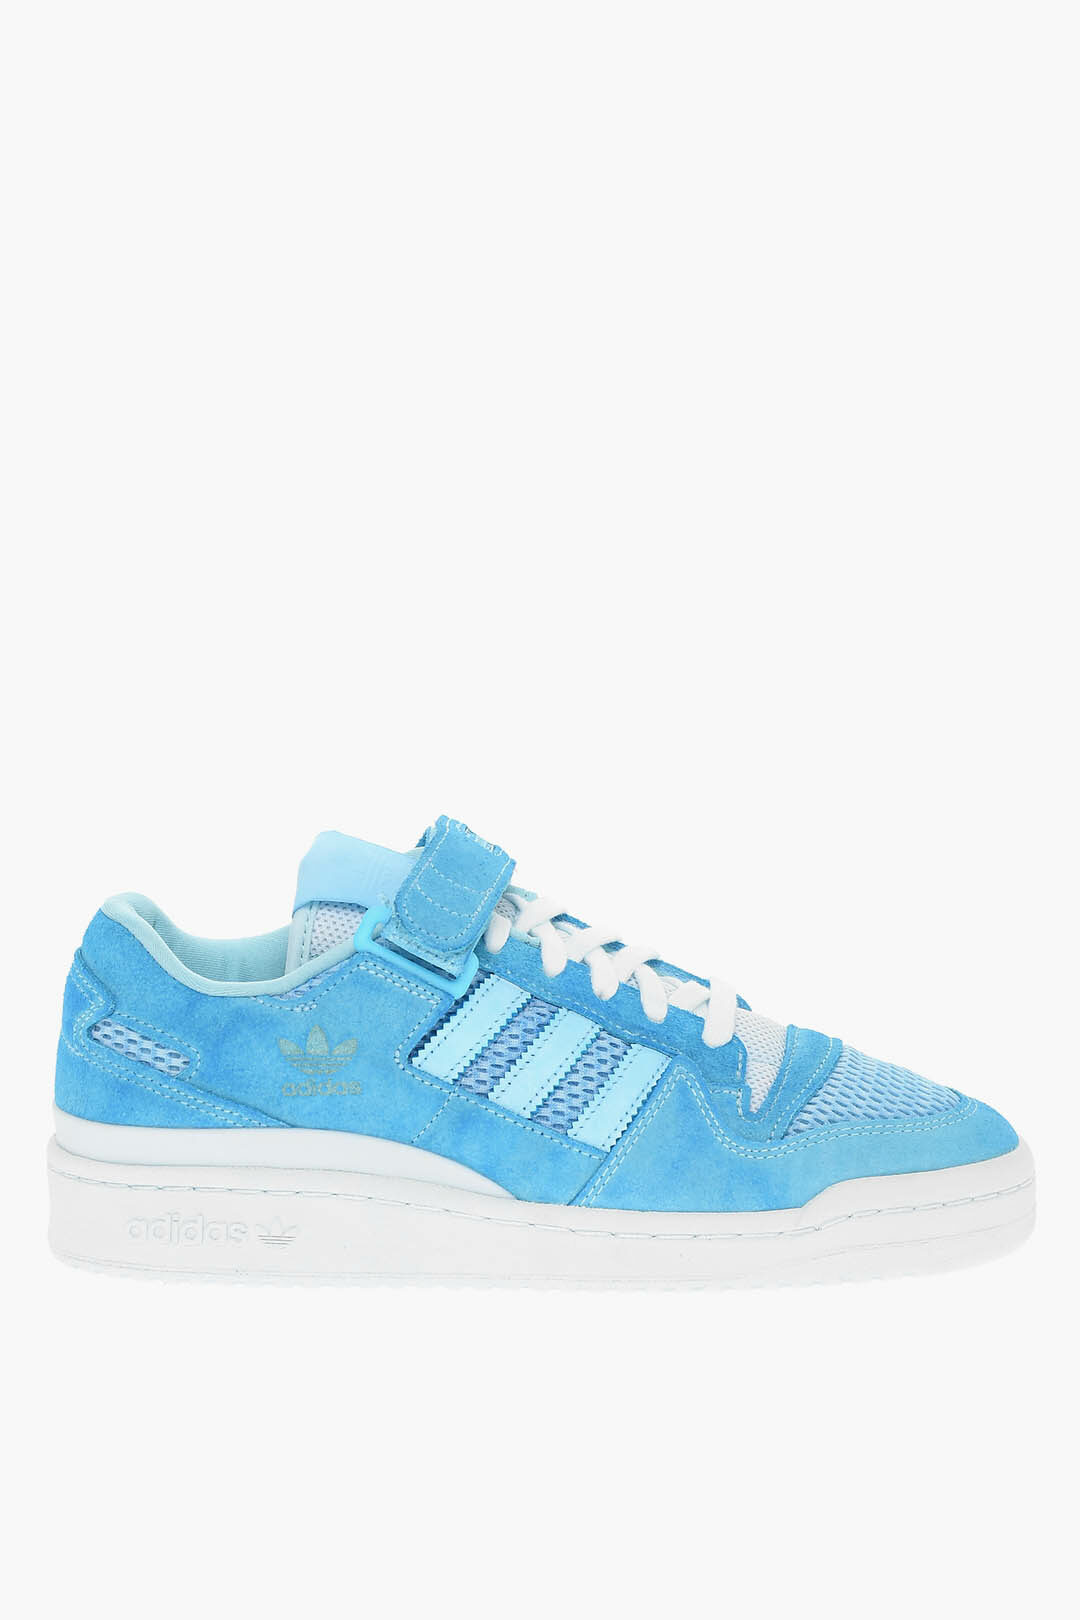 Adidas Suede Leather FORUM 84 Low-Top Sneakers men - Outlet